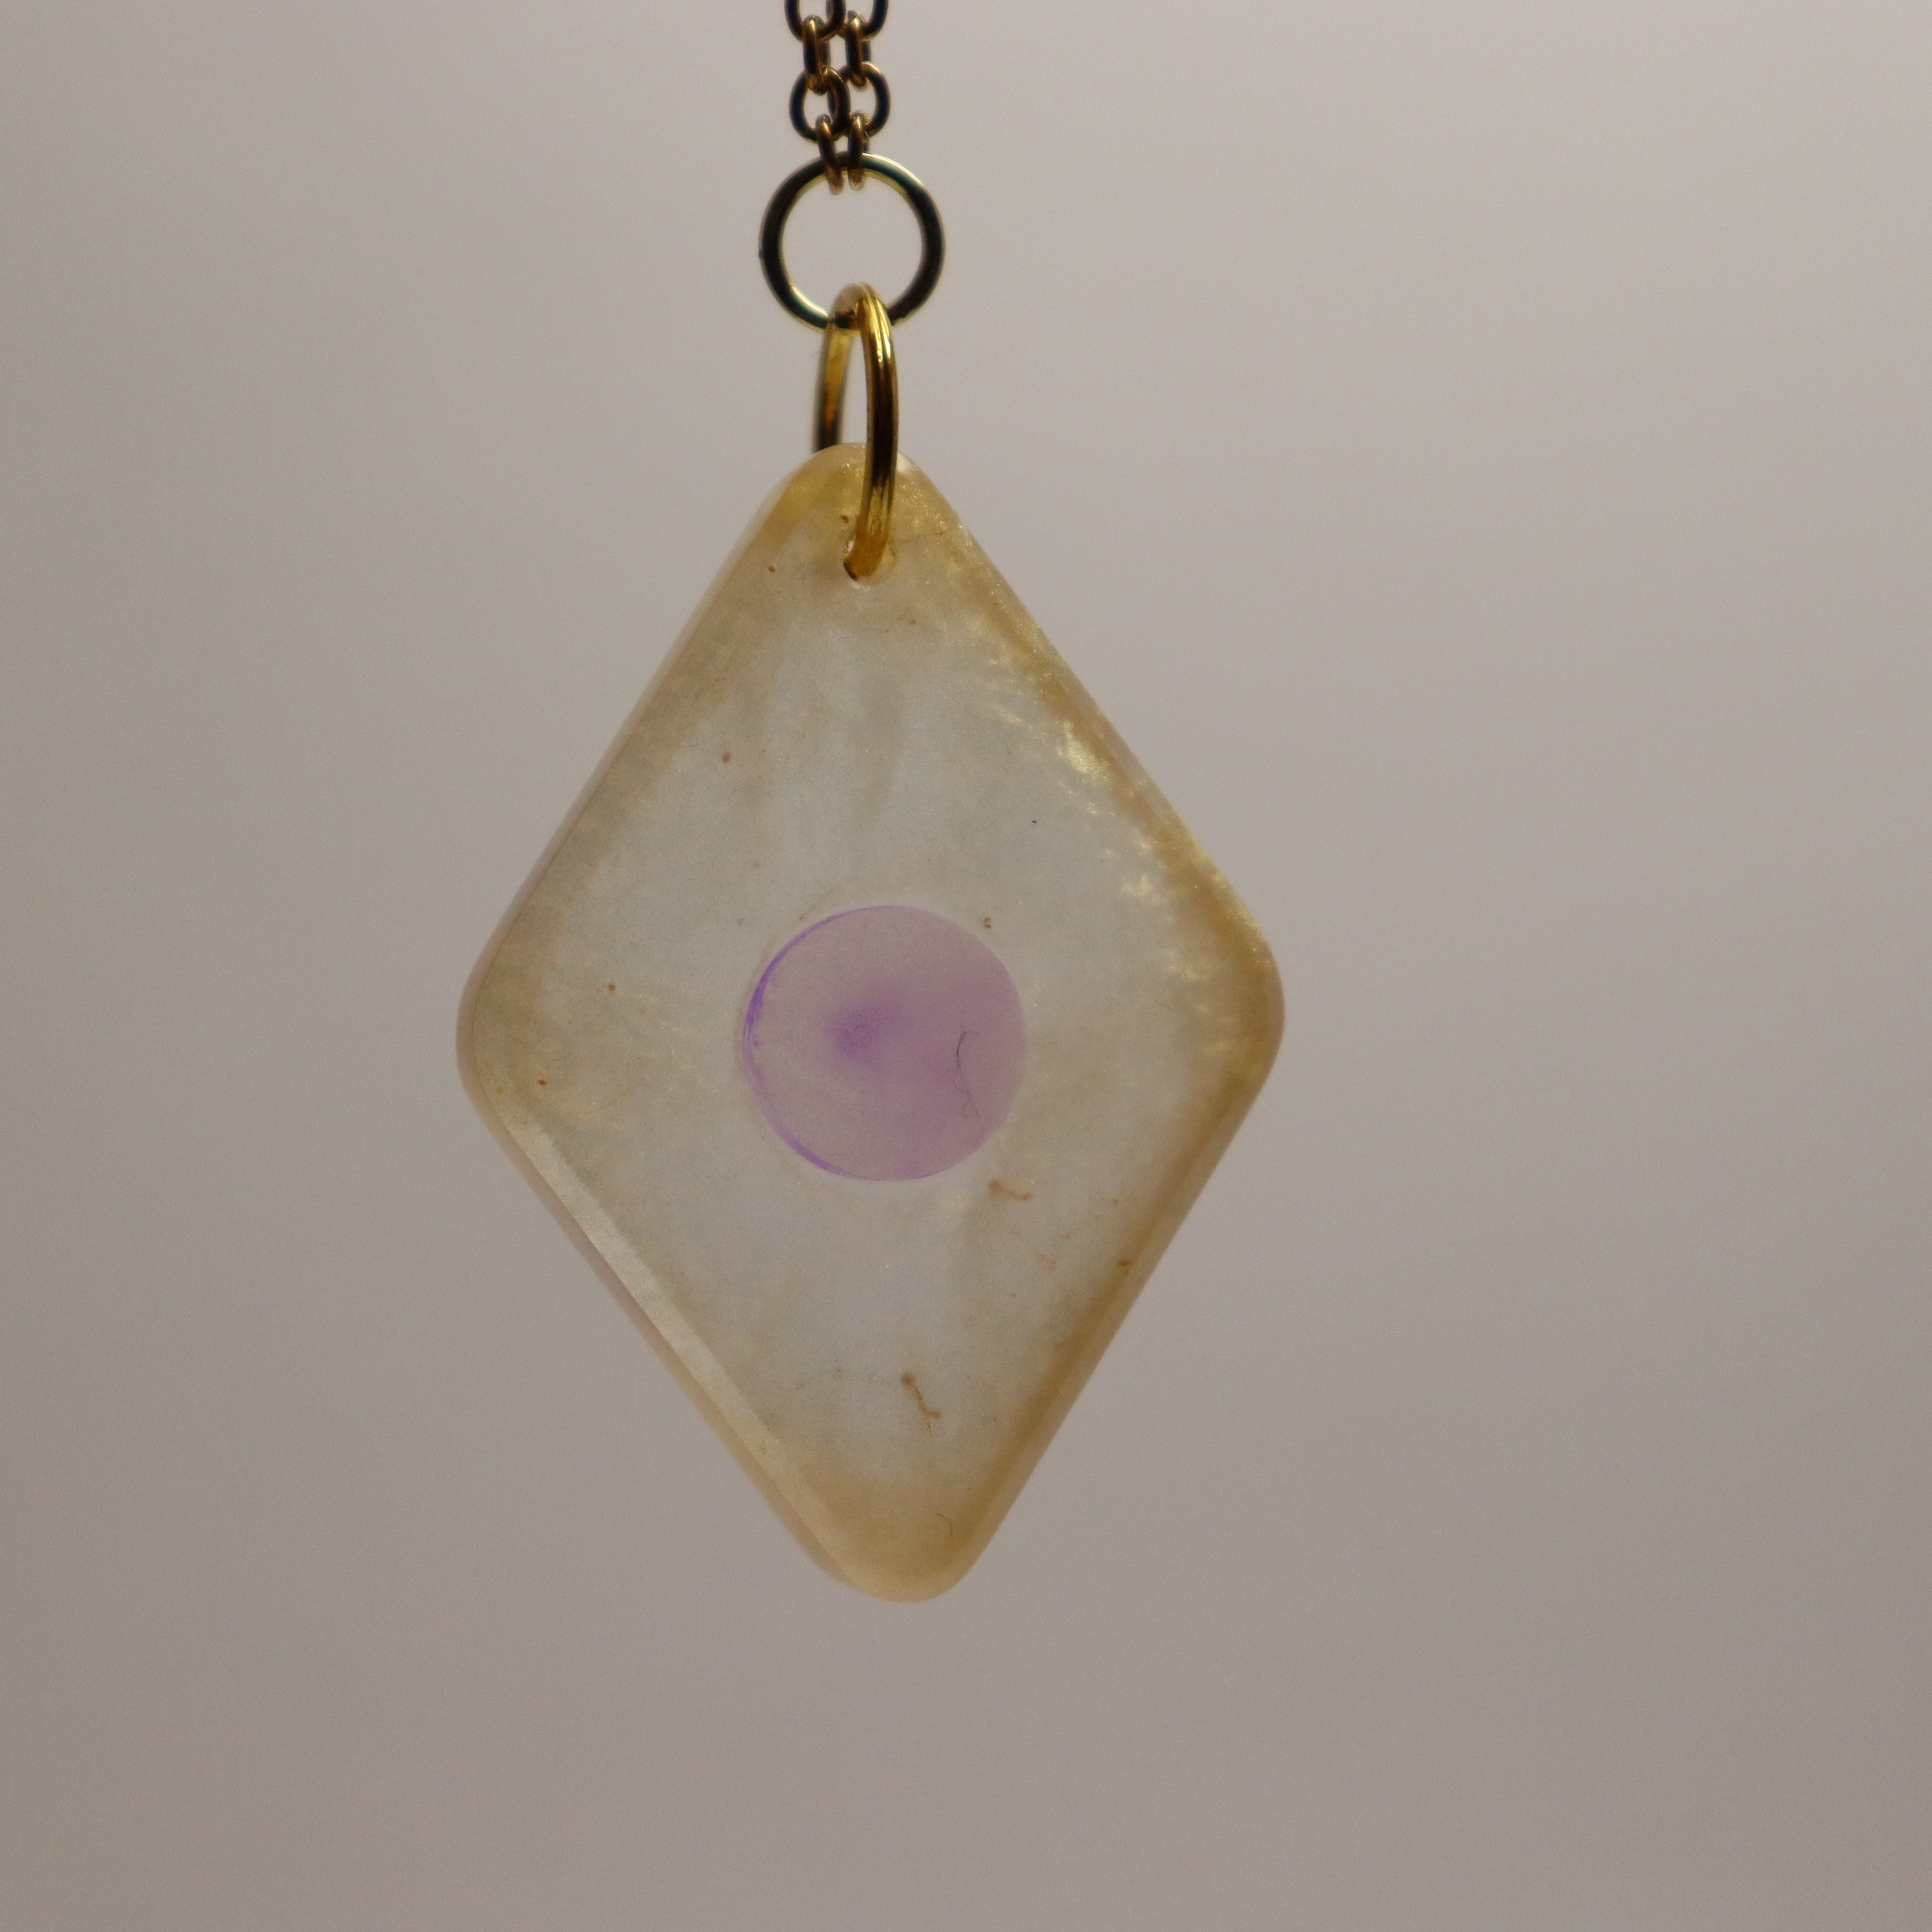 A diamond shaped necklace hangs on a gold chain. The necklace has a gold exterior that becomes more transparent closer to the centre and a light purple circle in the middle.